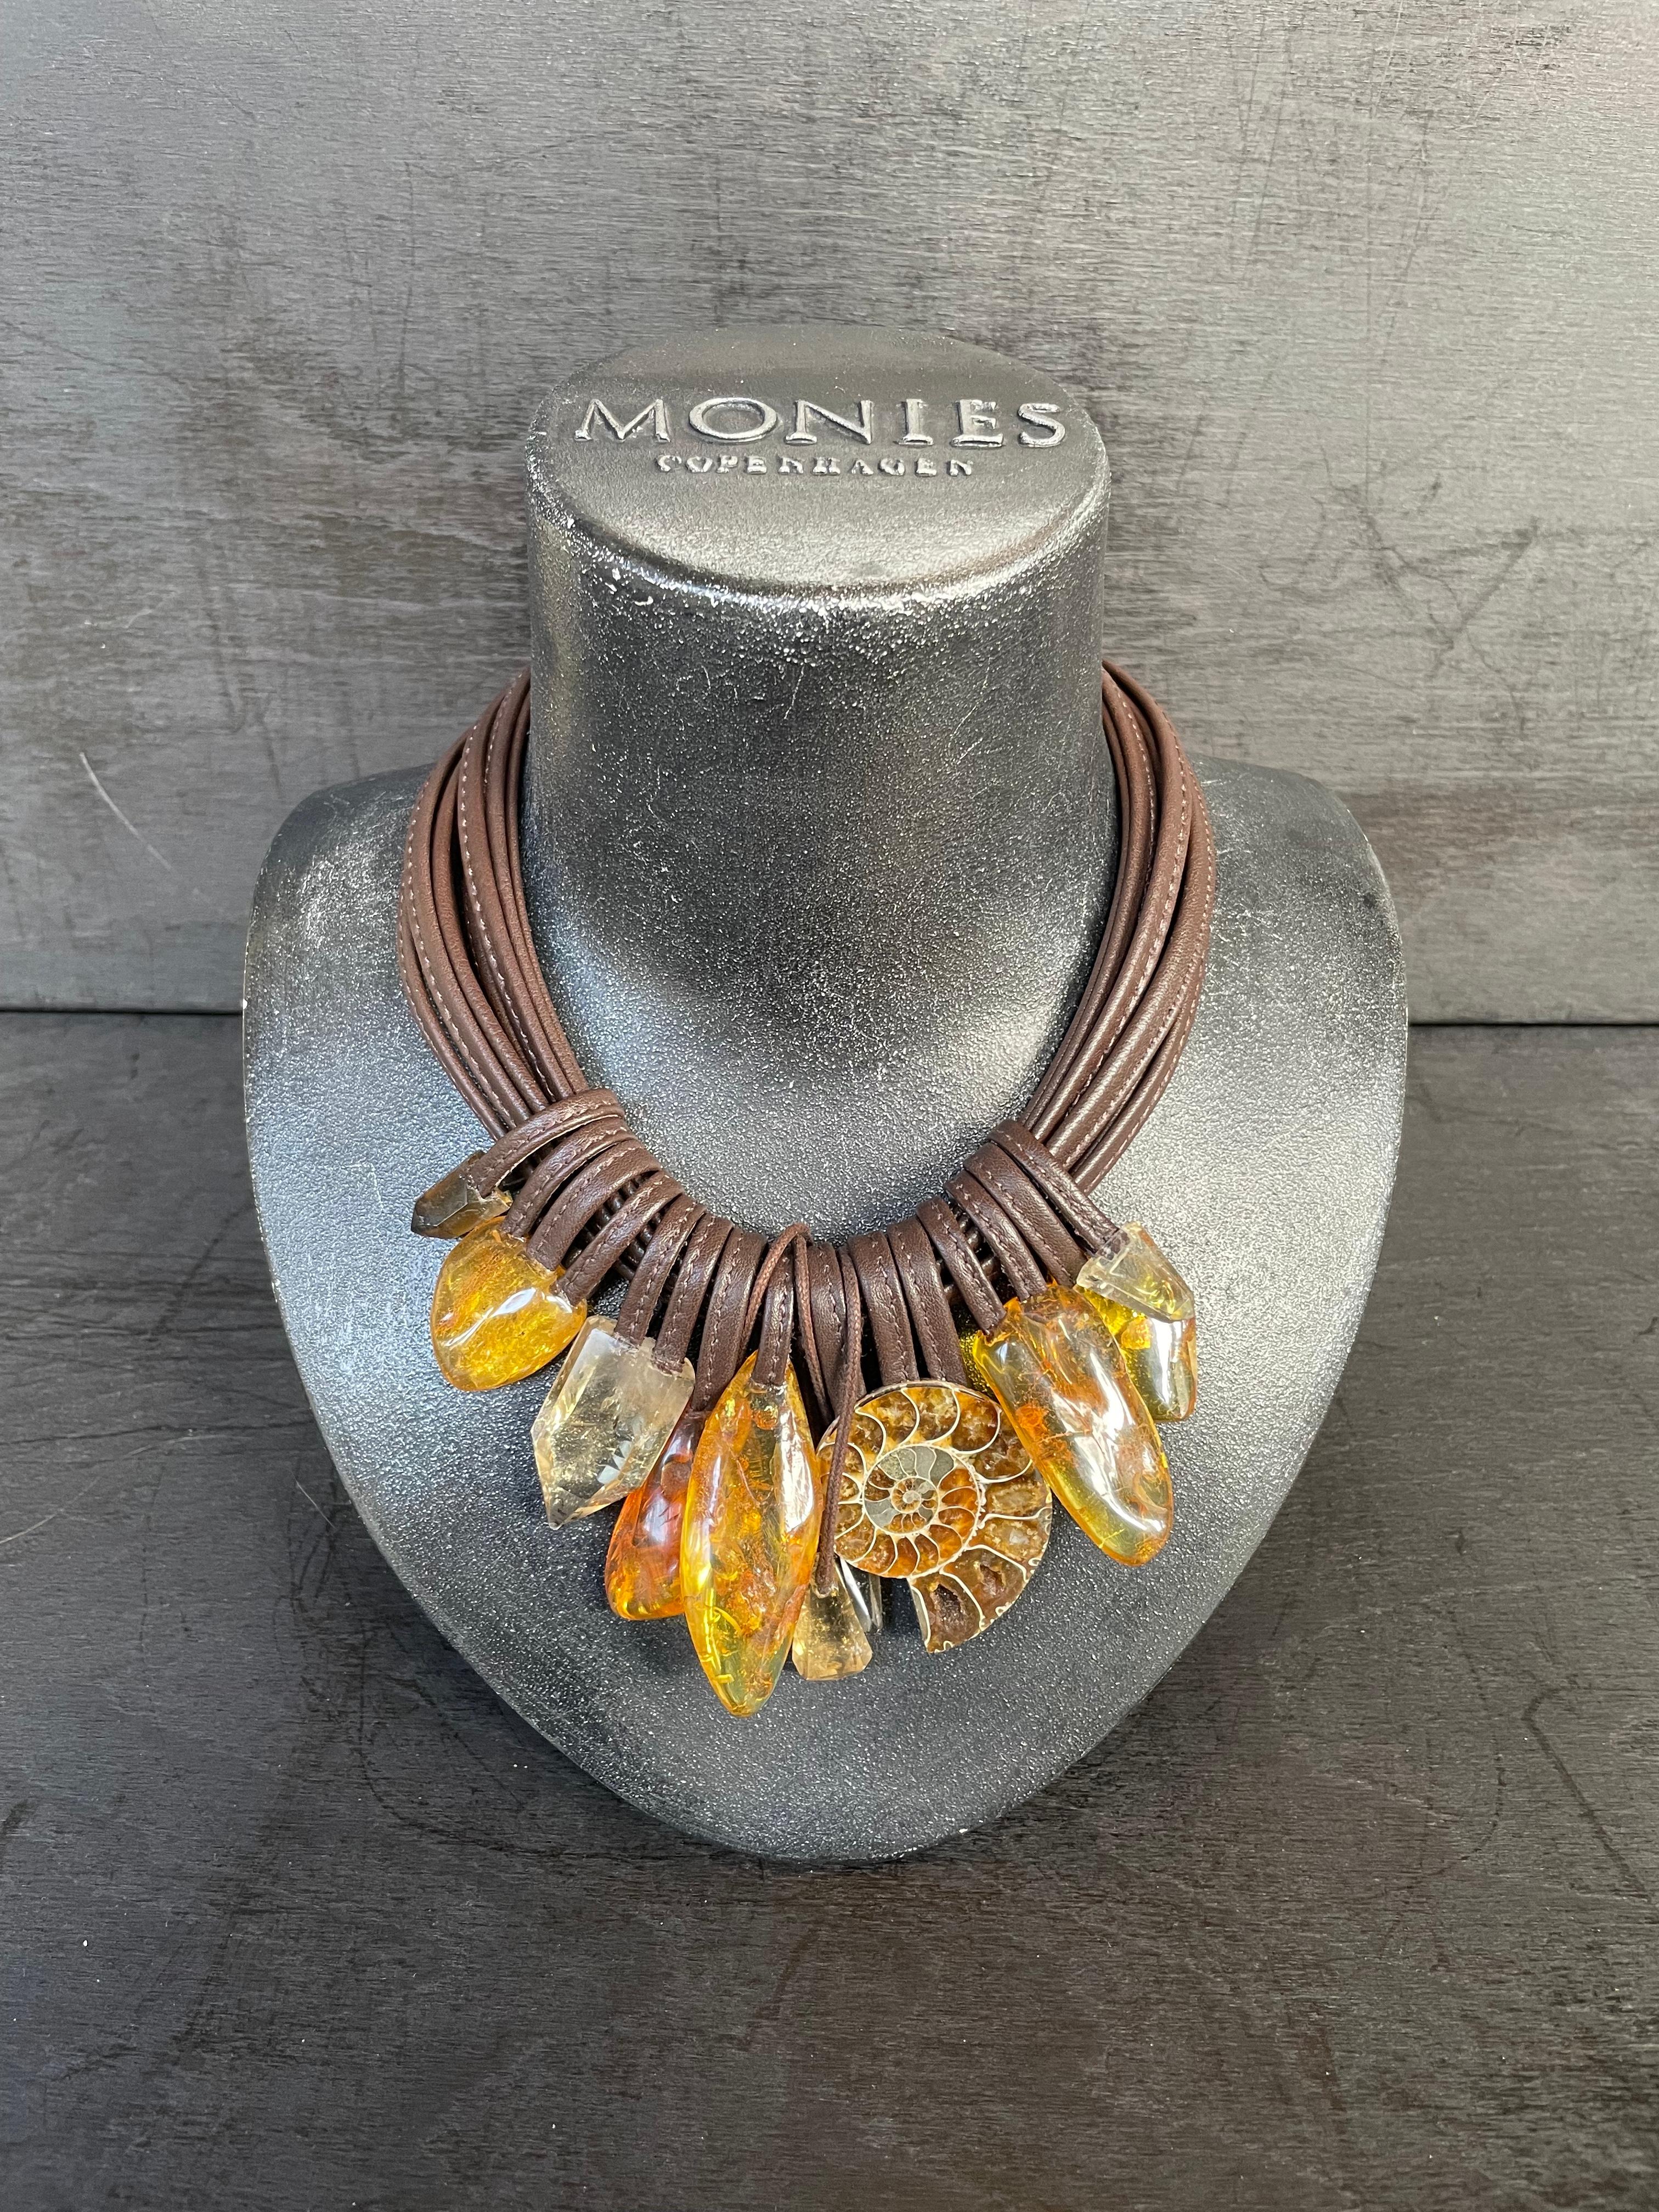 One-of-a-kind statement necklace from the Danish jewellery brand, Monies.
Made in Amber, Ammonites, Crystal and Leather with a leather clasp.

Handcrafted in the Monies Atelier in Copenhagen.